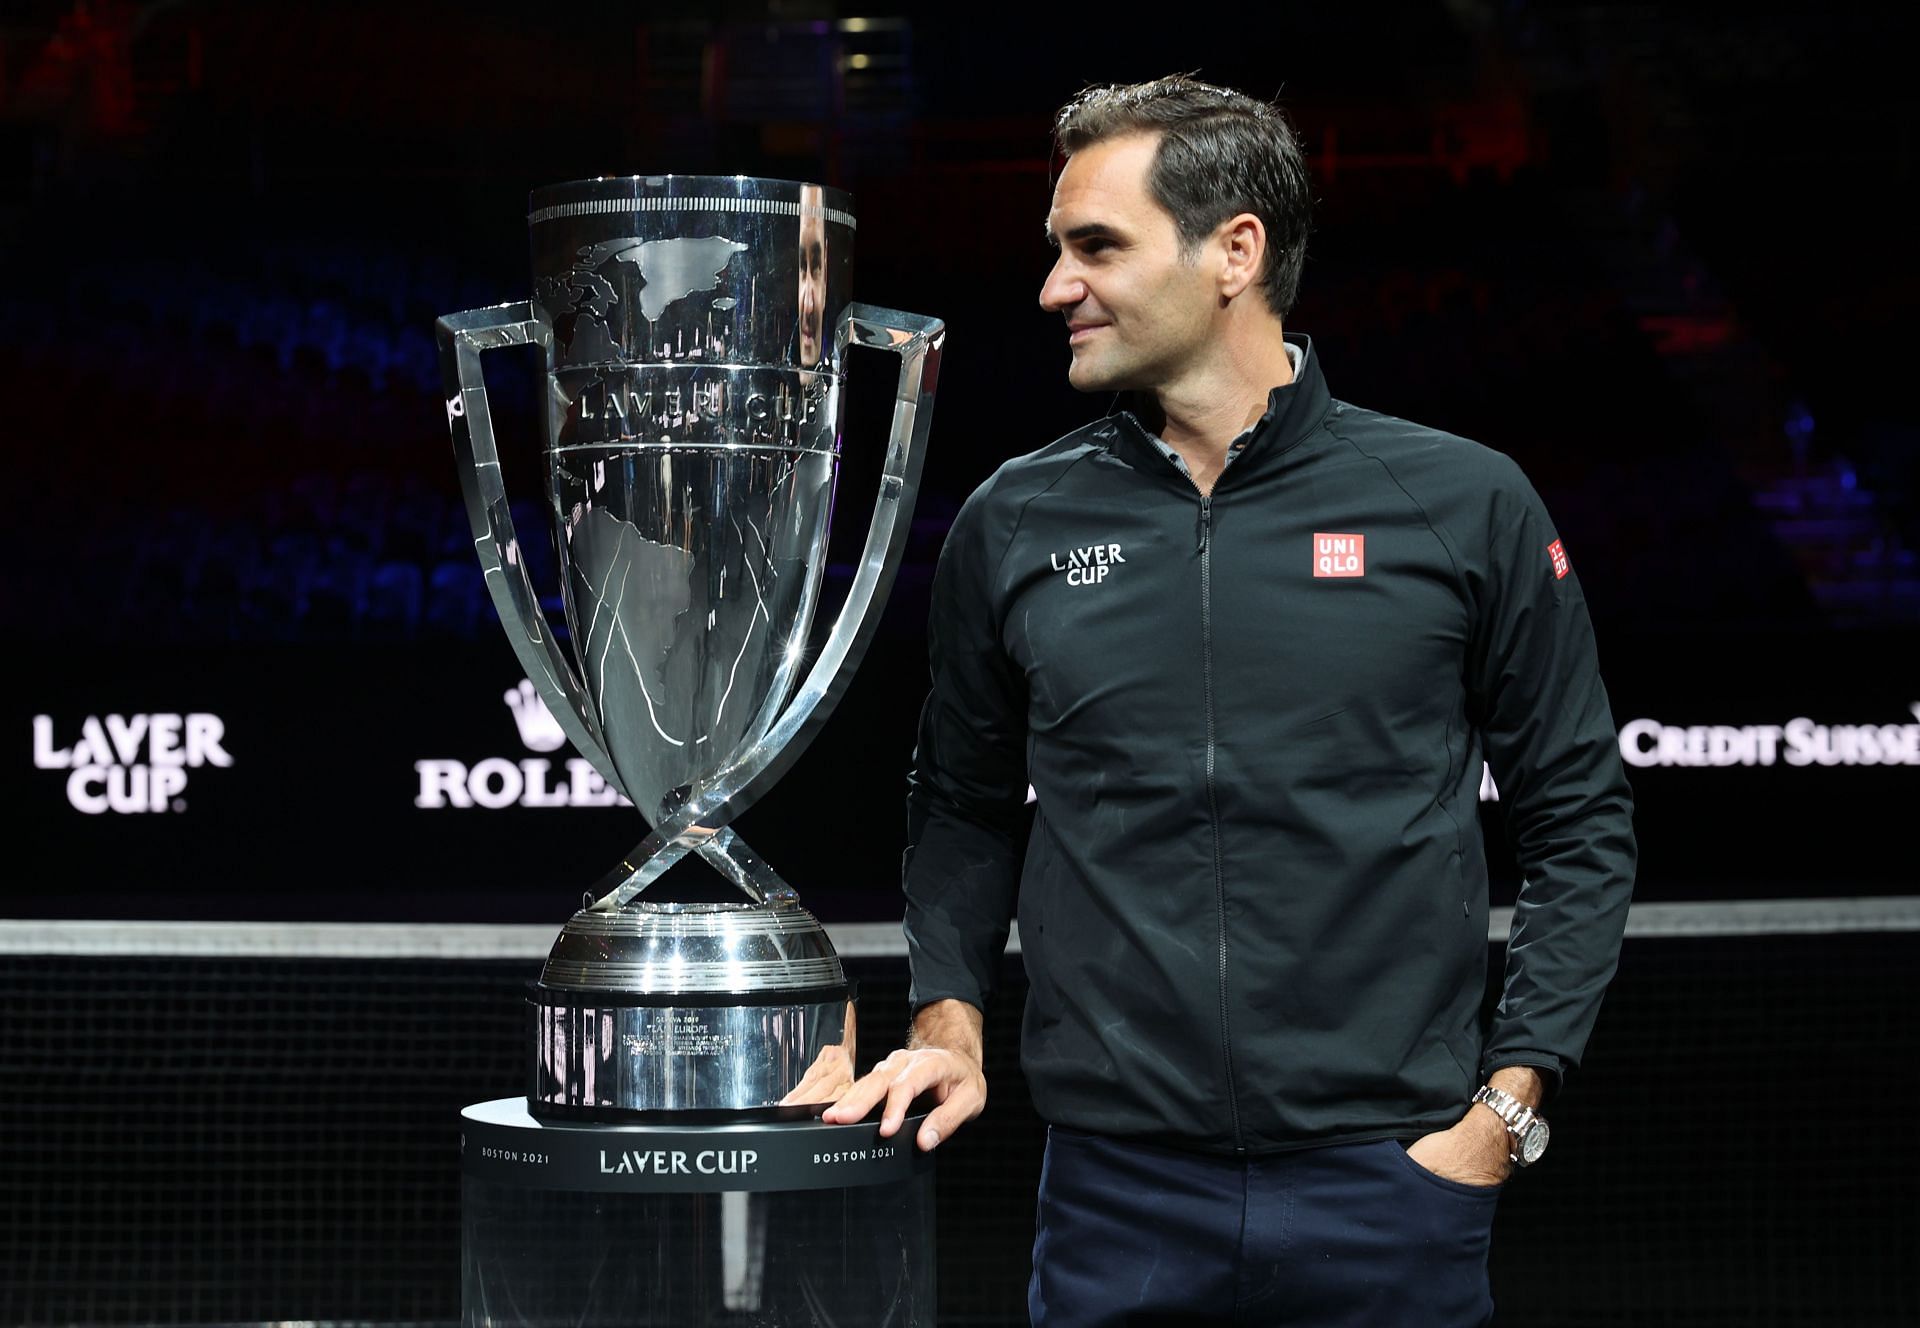 Roger Federer is set to play in the Laver Cup in September and in Basel in October.